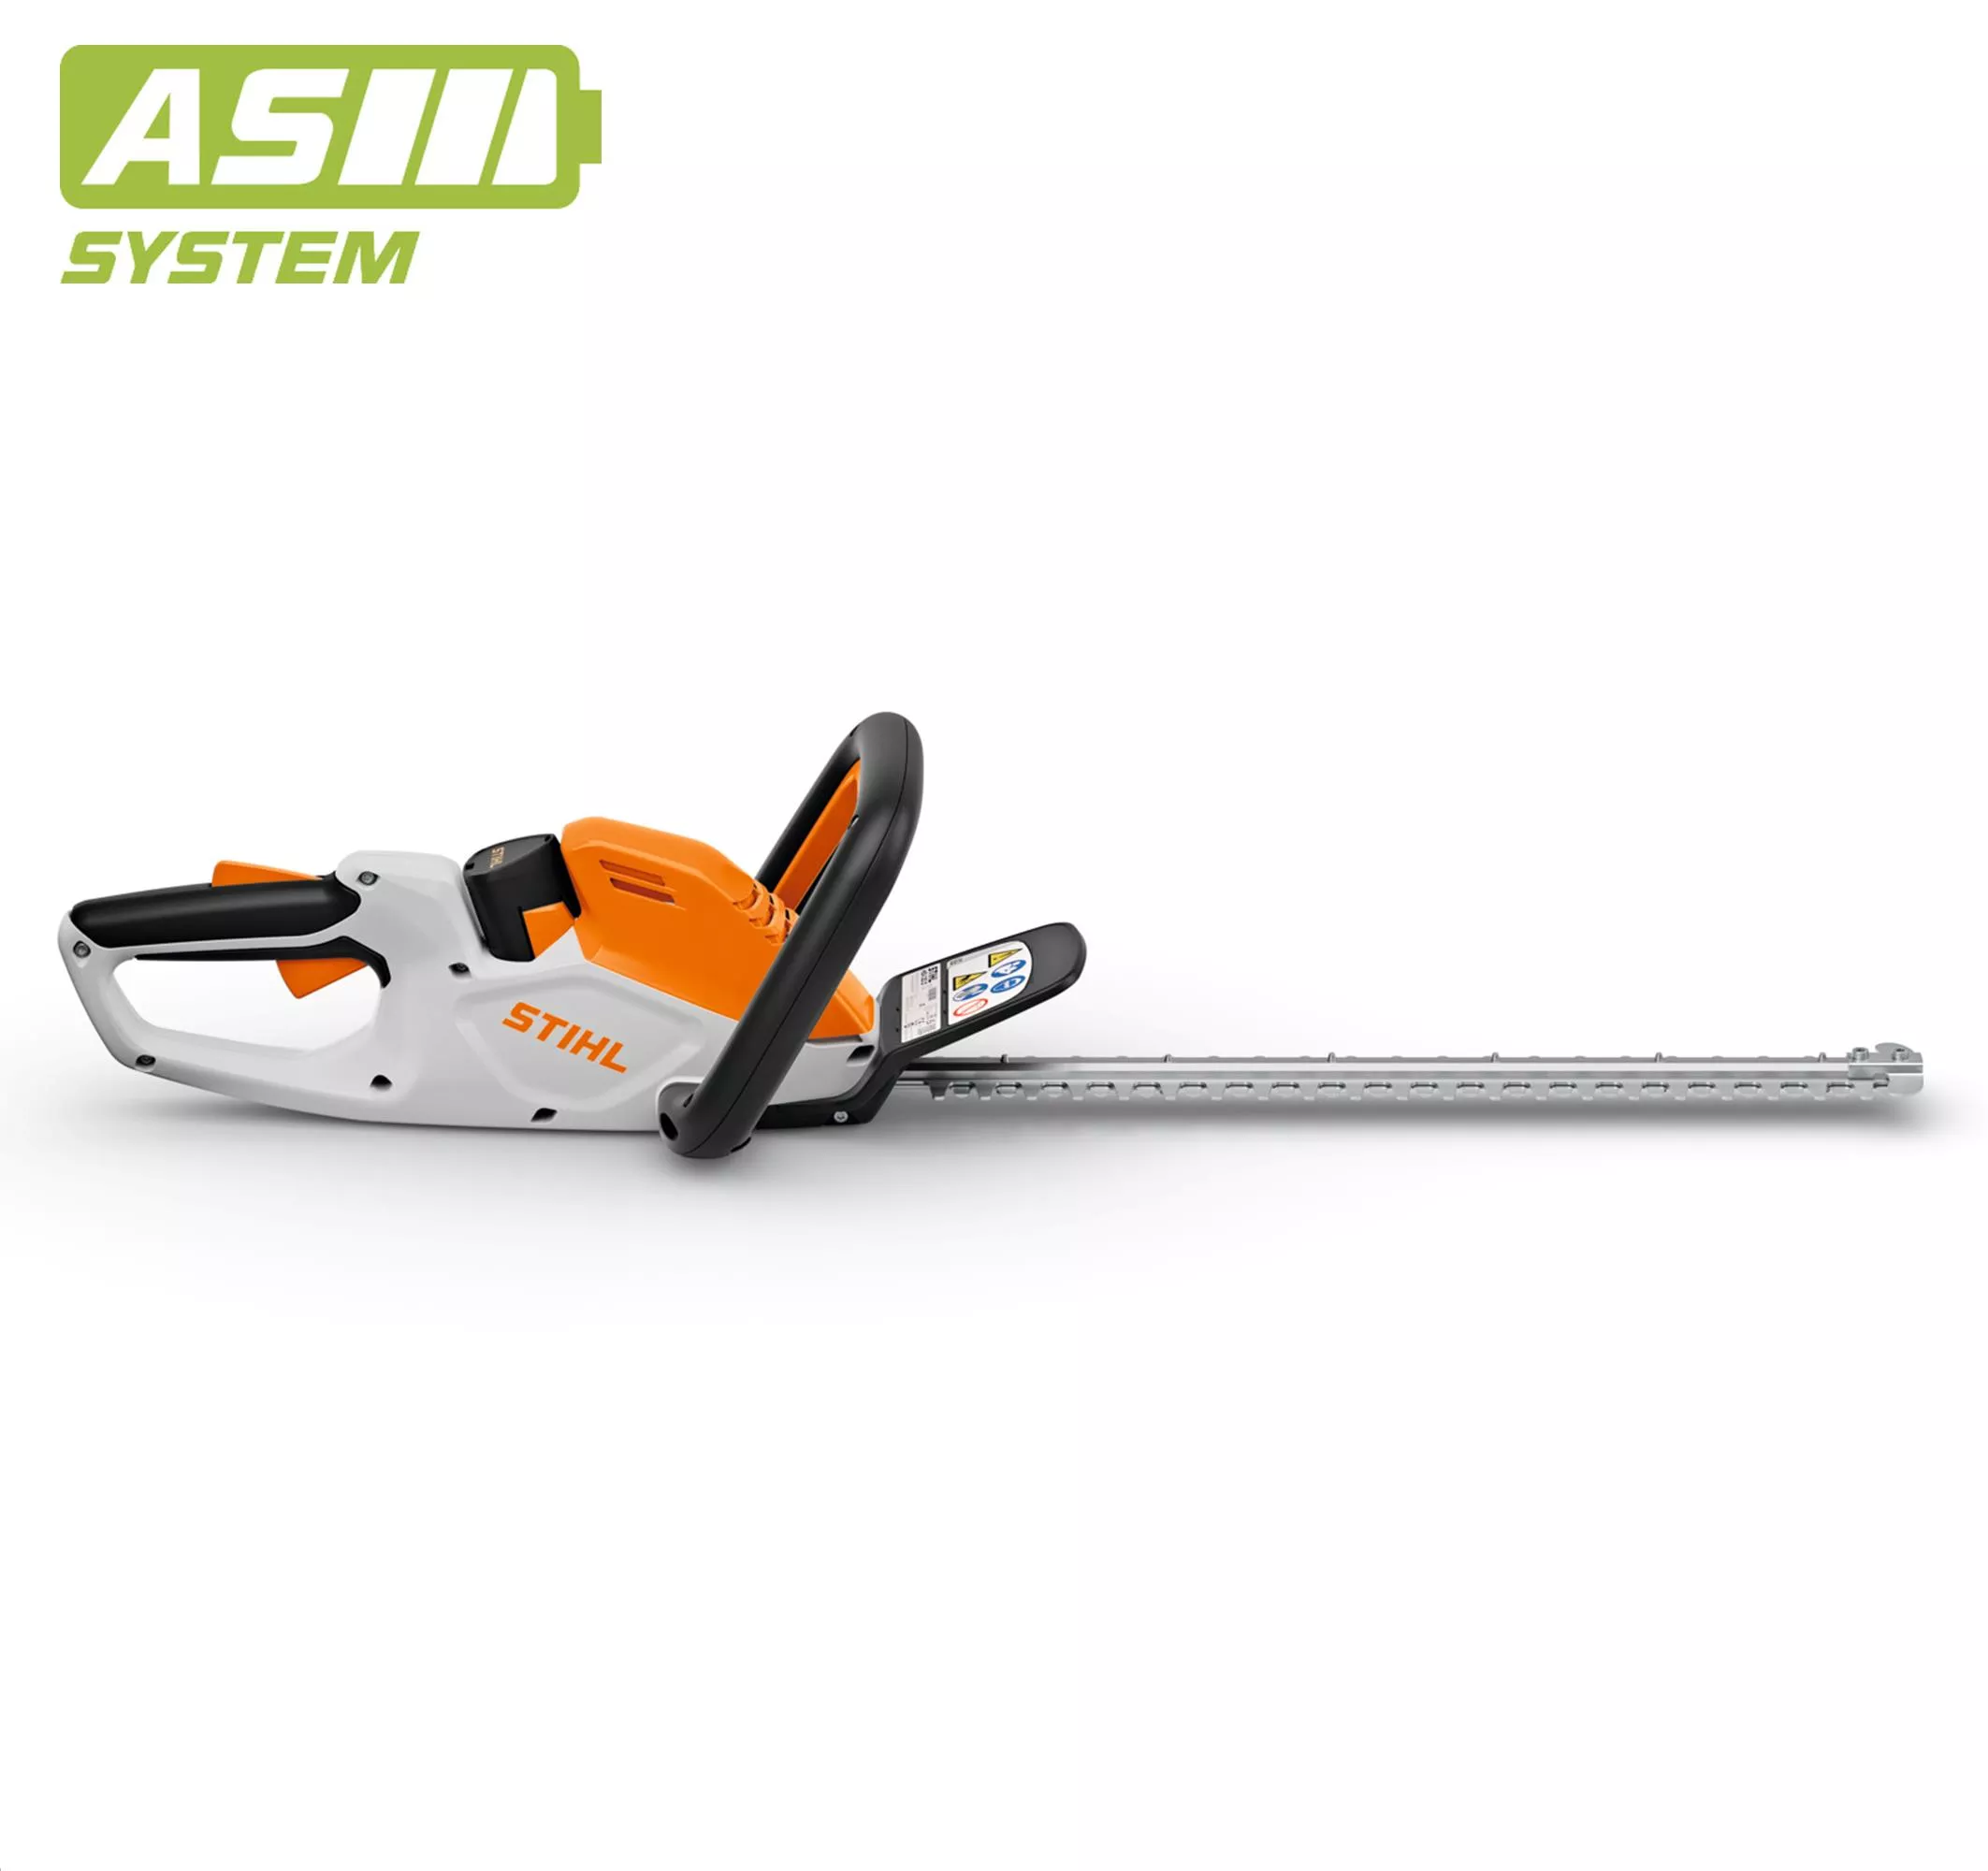 HSA 30 Cordless Hedge Trimmer AK - Tool Only